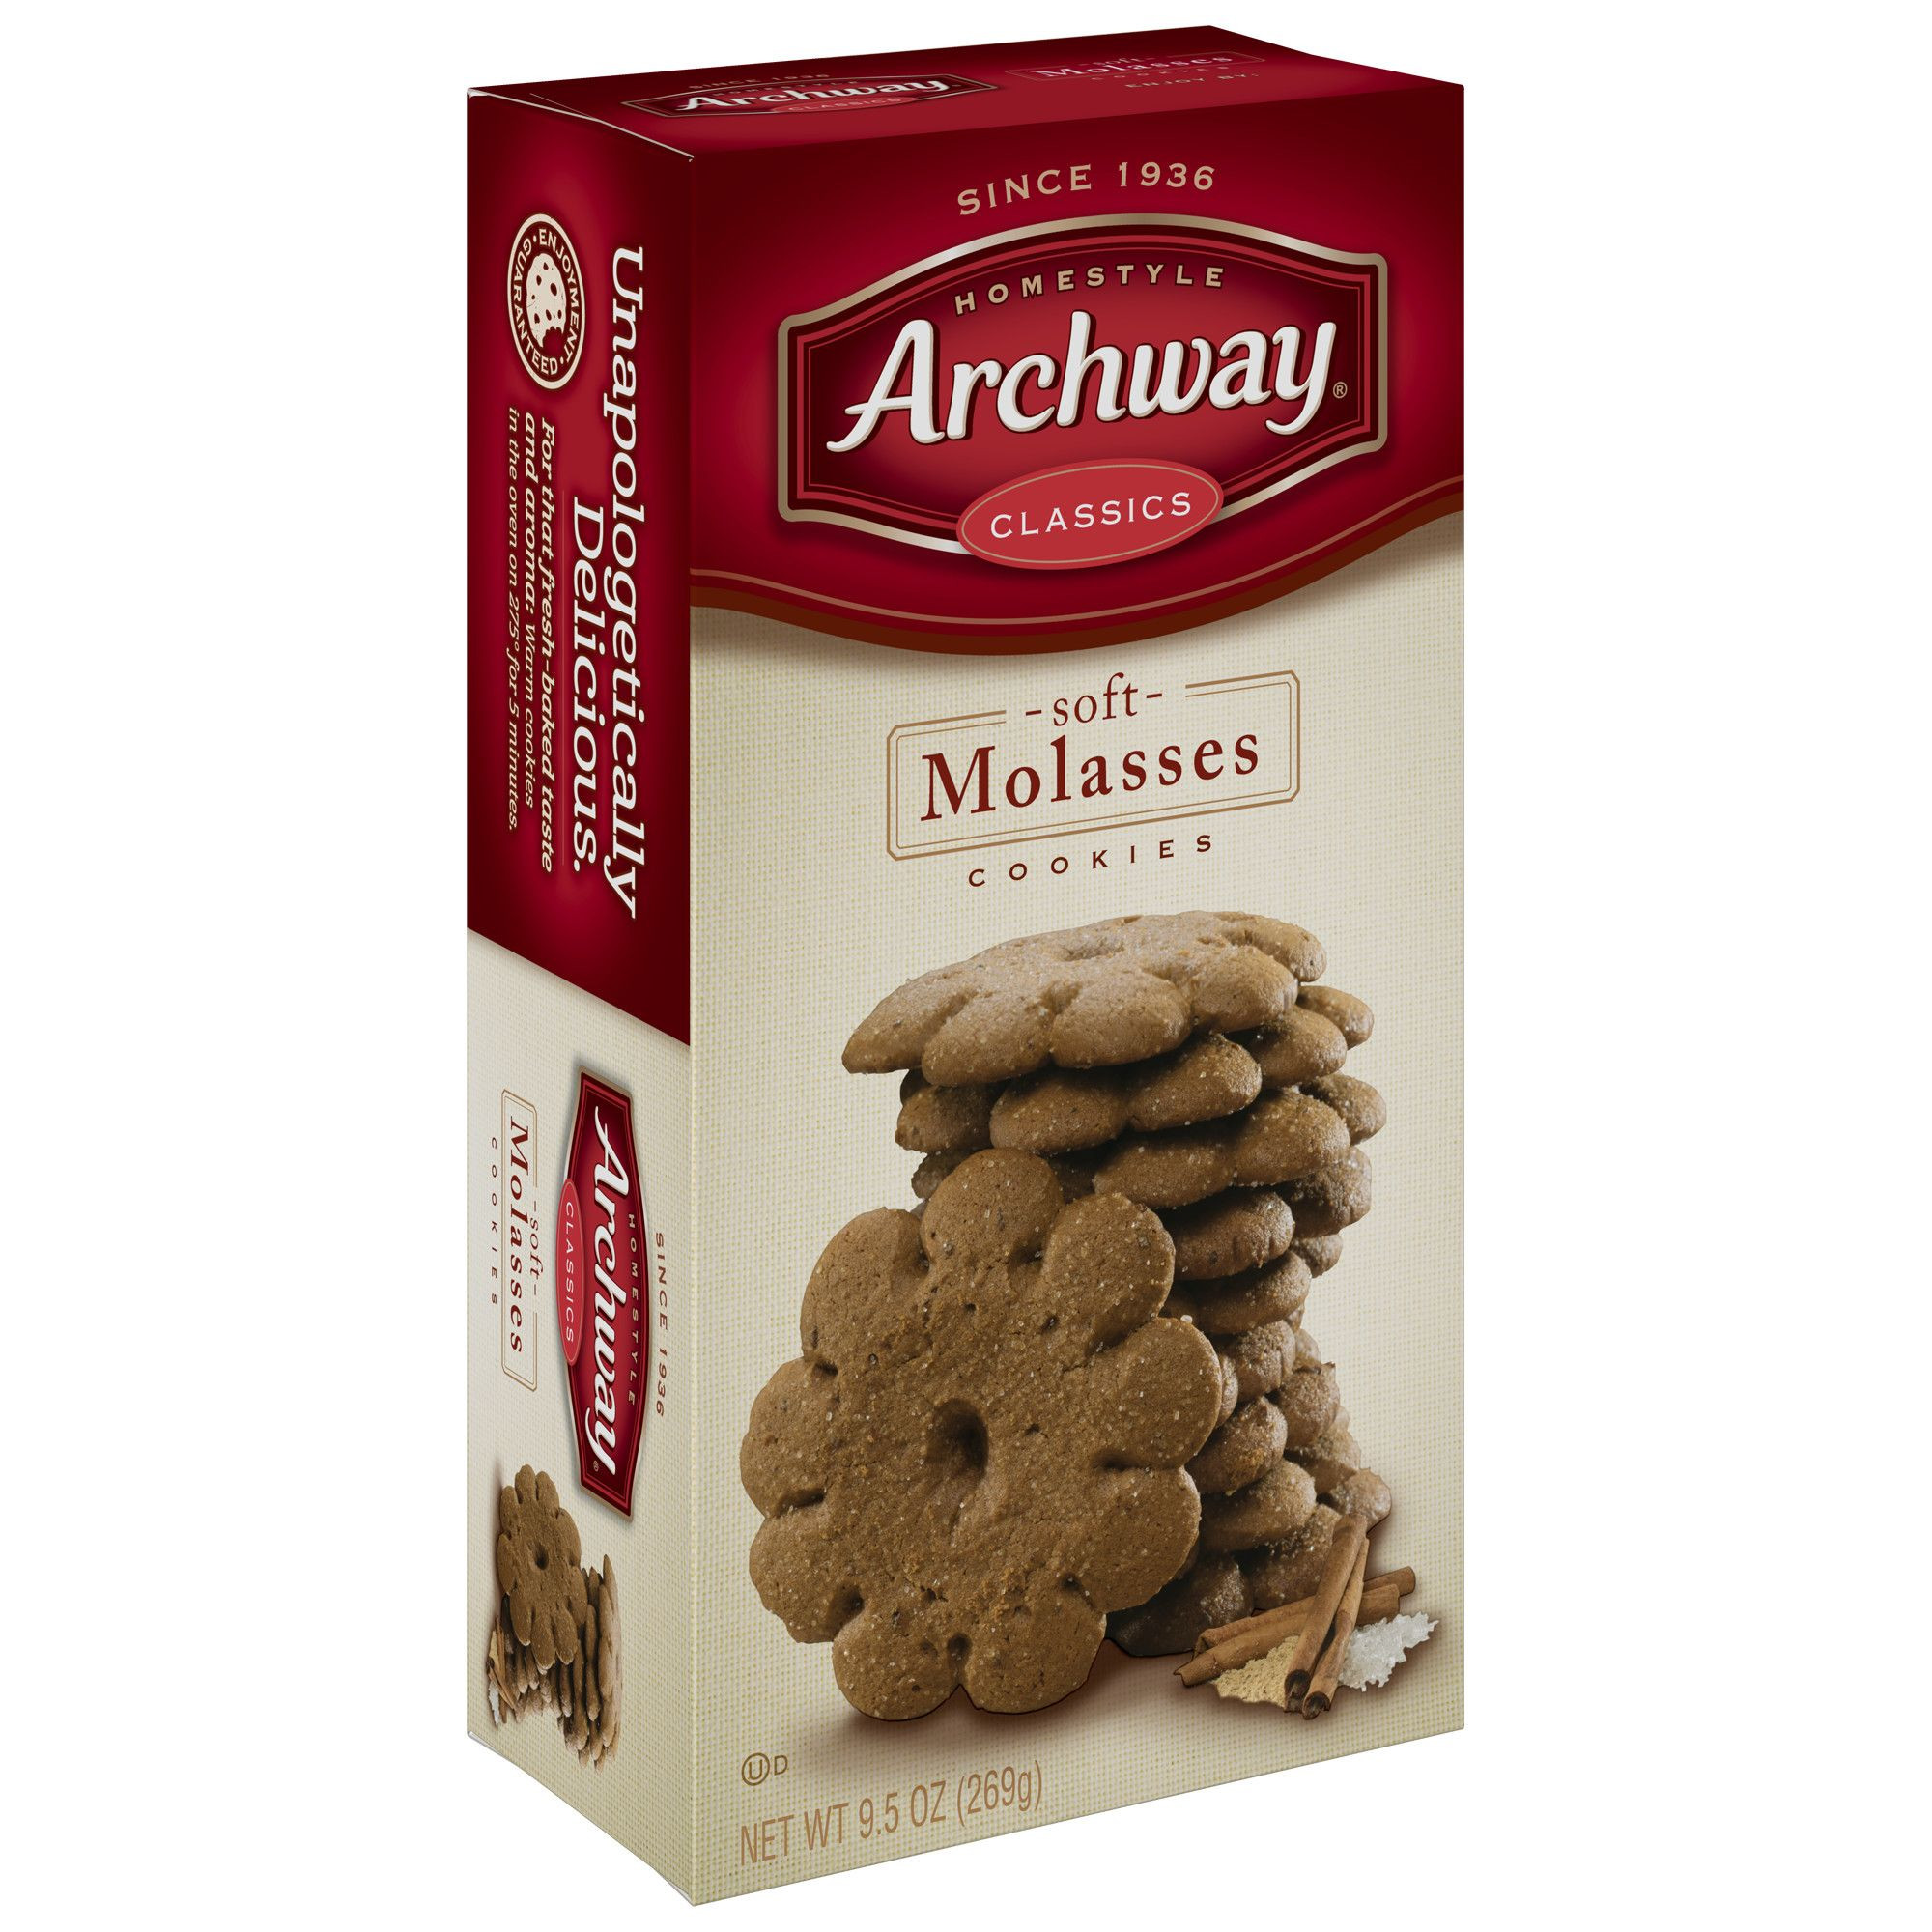 Archway Molasses Cookies
 Archway Soft Molasses Cookies